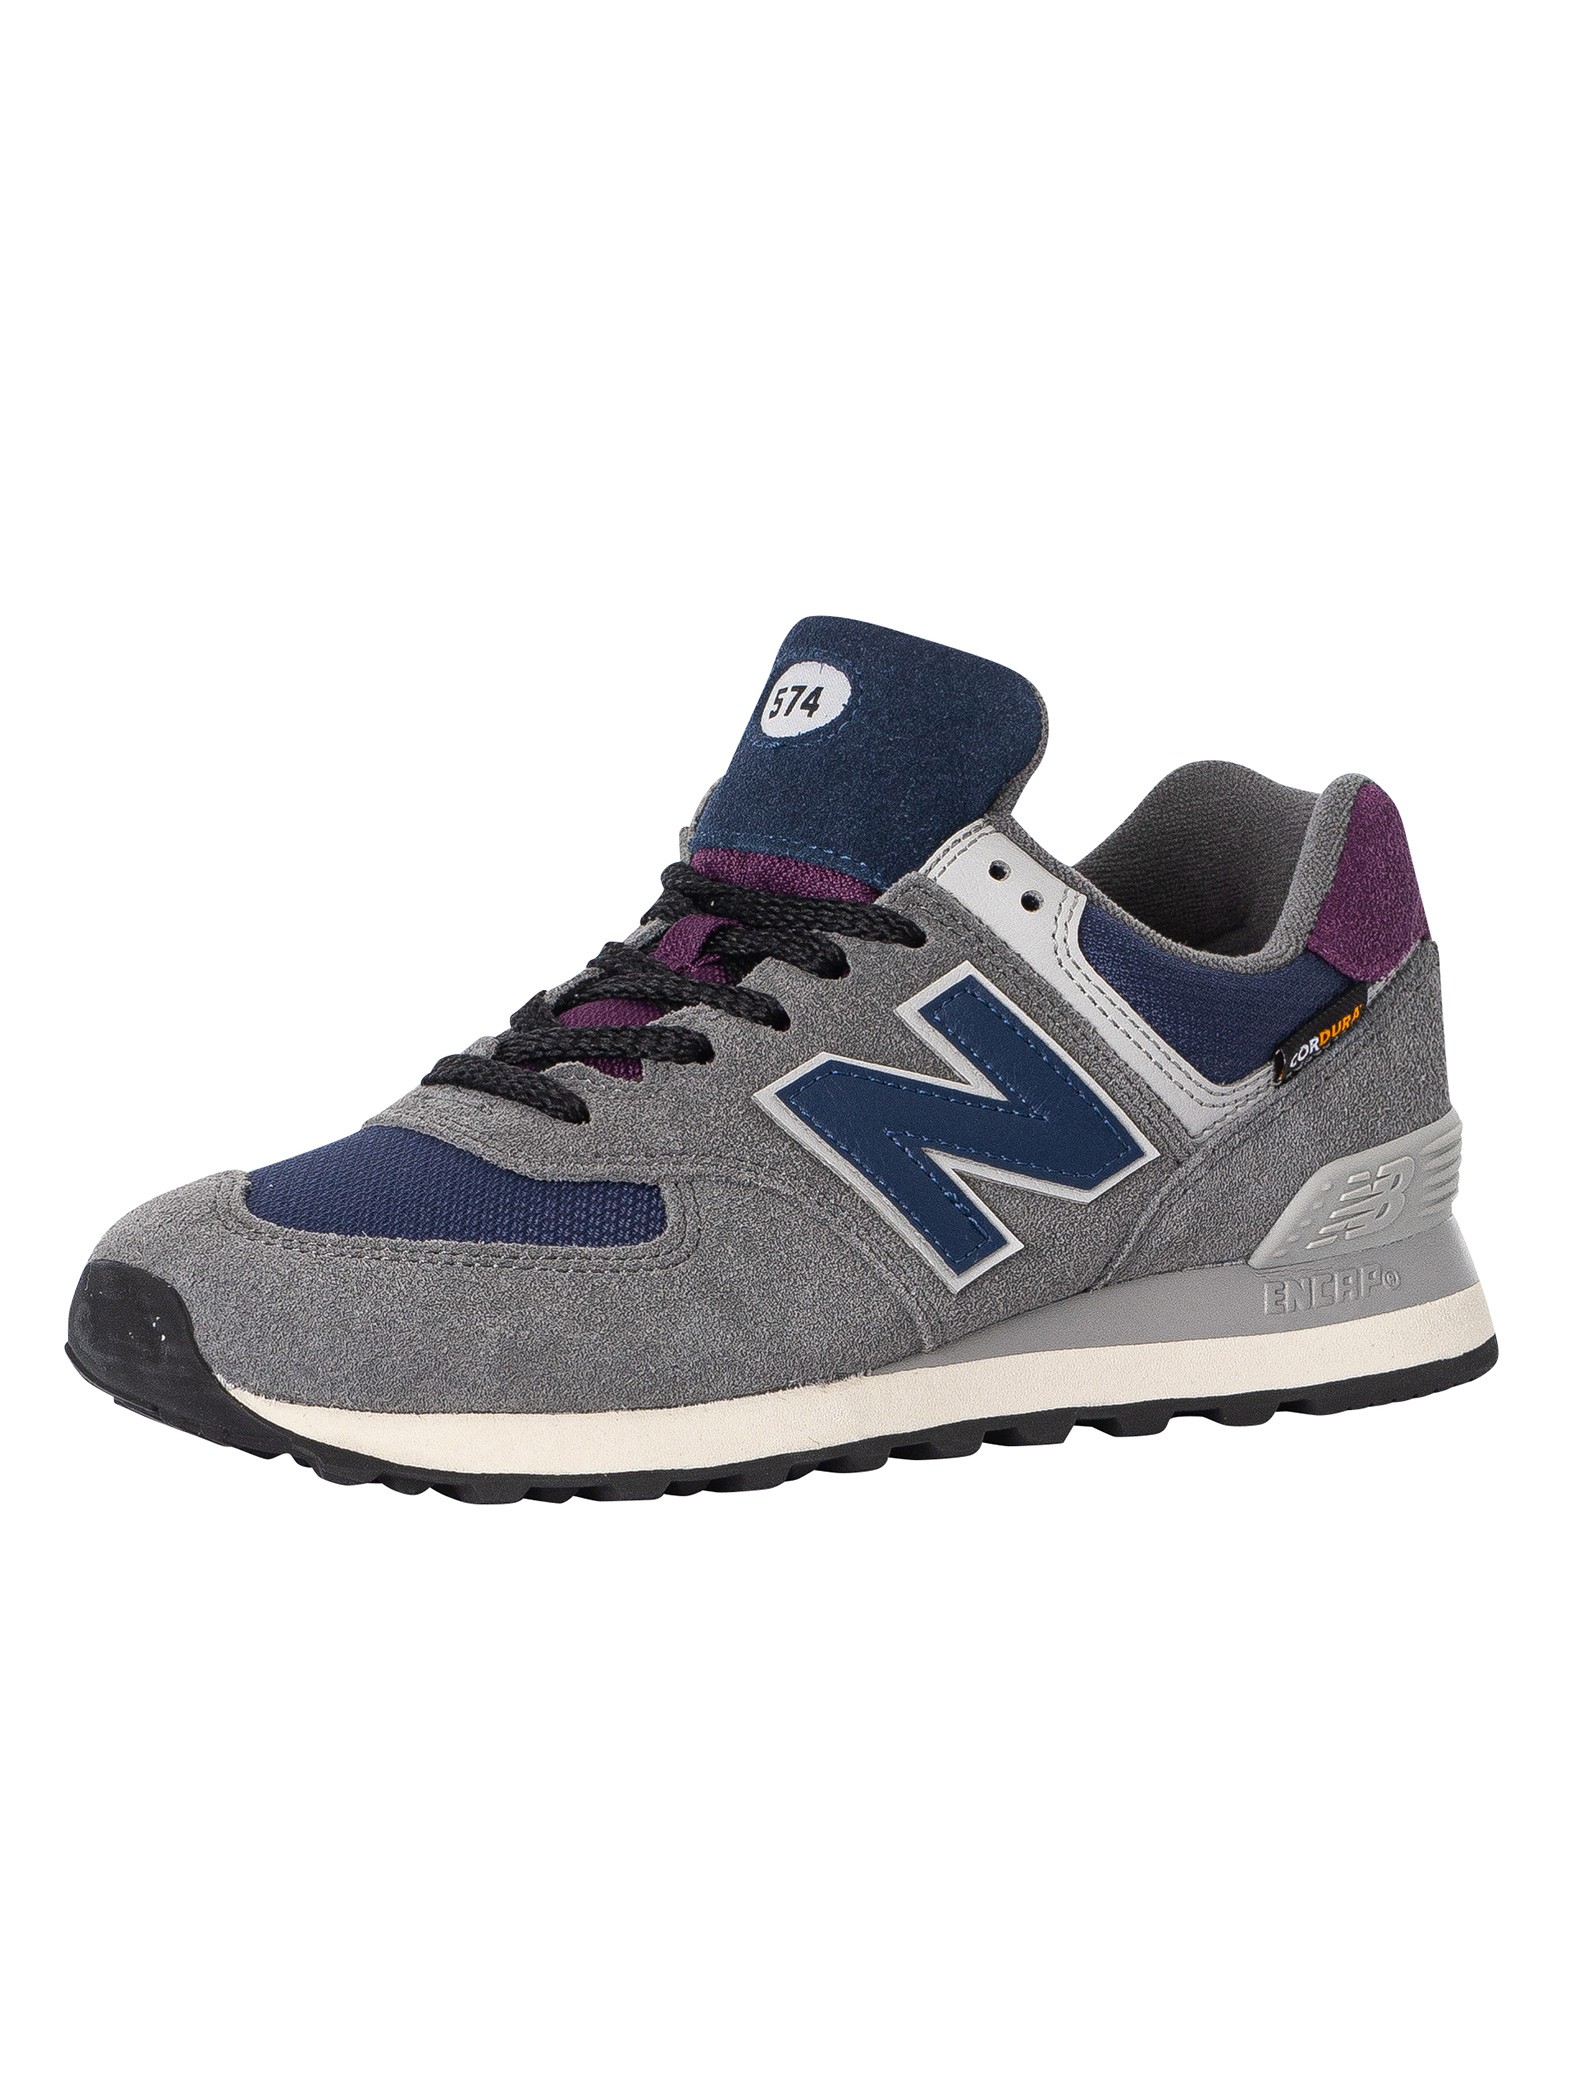 New Balance 574 Suede Trainers - Grey/Navy | Standout